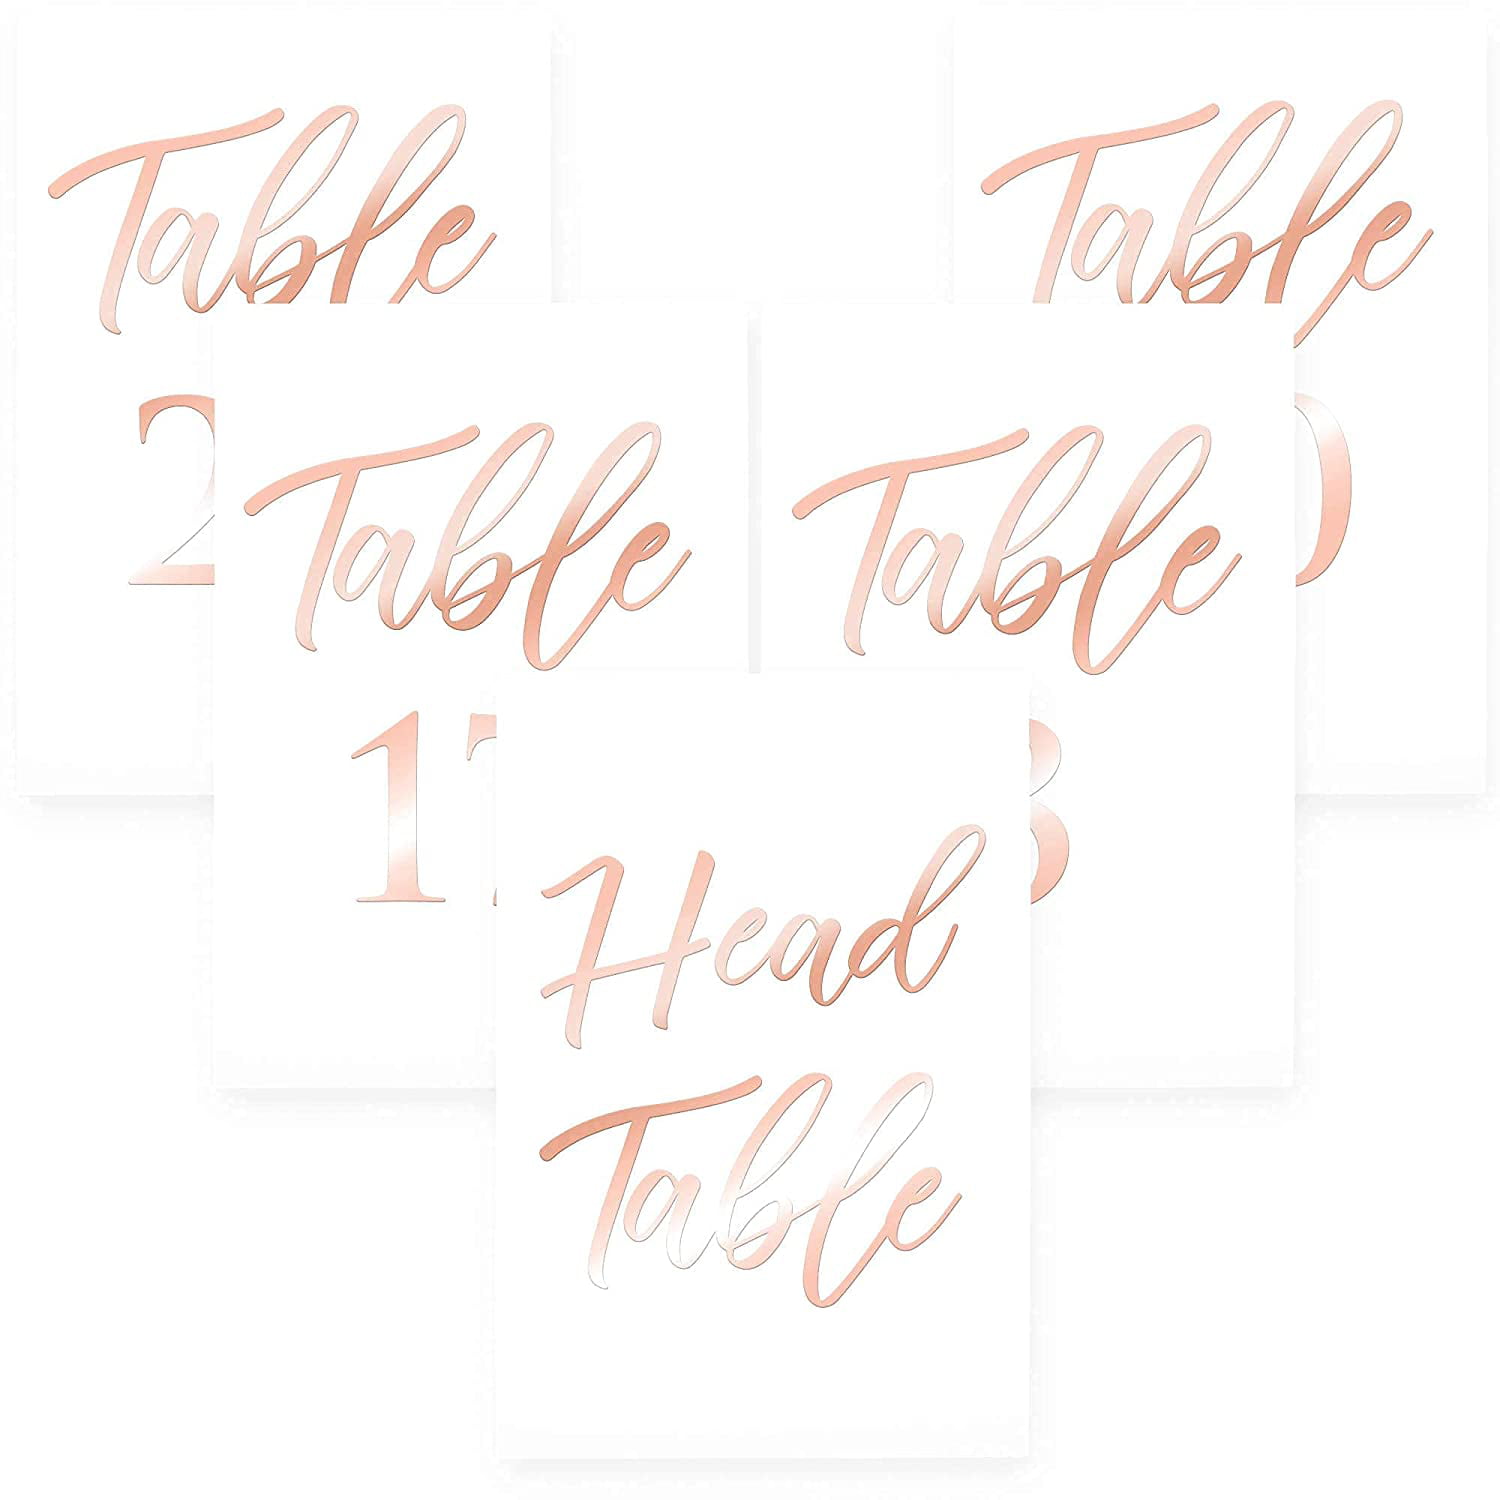 ZICOTO Elegant Rose Gold Wedding Table Numbers in Double Sided Rose Gold Foil Lettering with Head and Gift Table Card 4 x 6 inches and Numbered 1-30 Perfect for Weddings and Events 